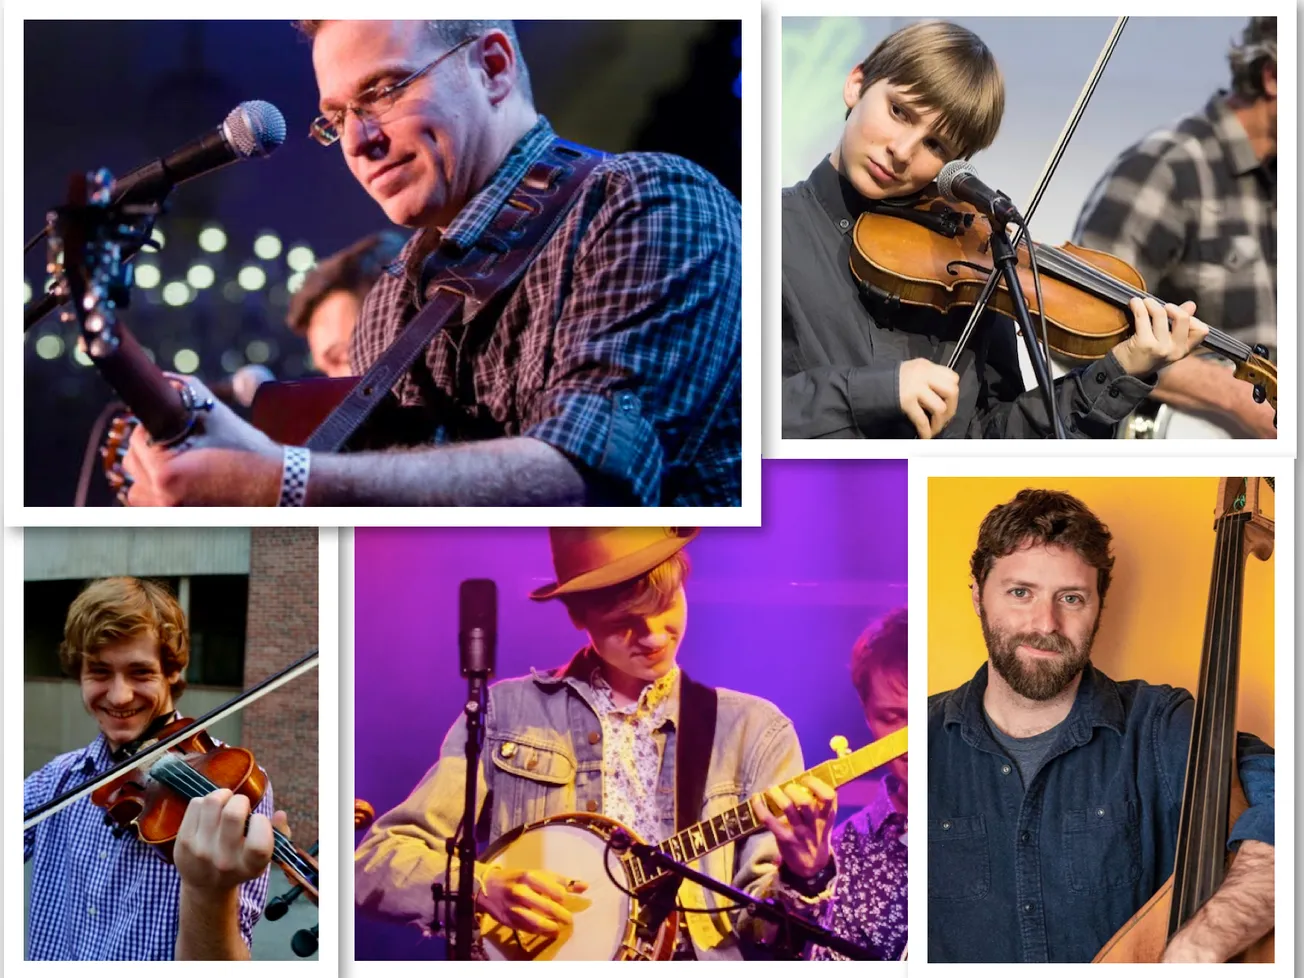 Bluegrass Concert with Tony Watt & Southeast Expressway taking place on March 22